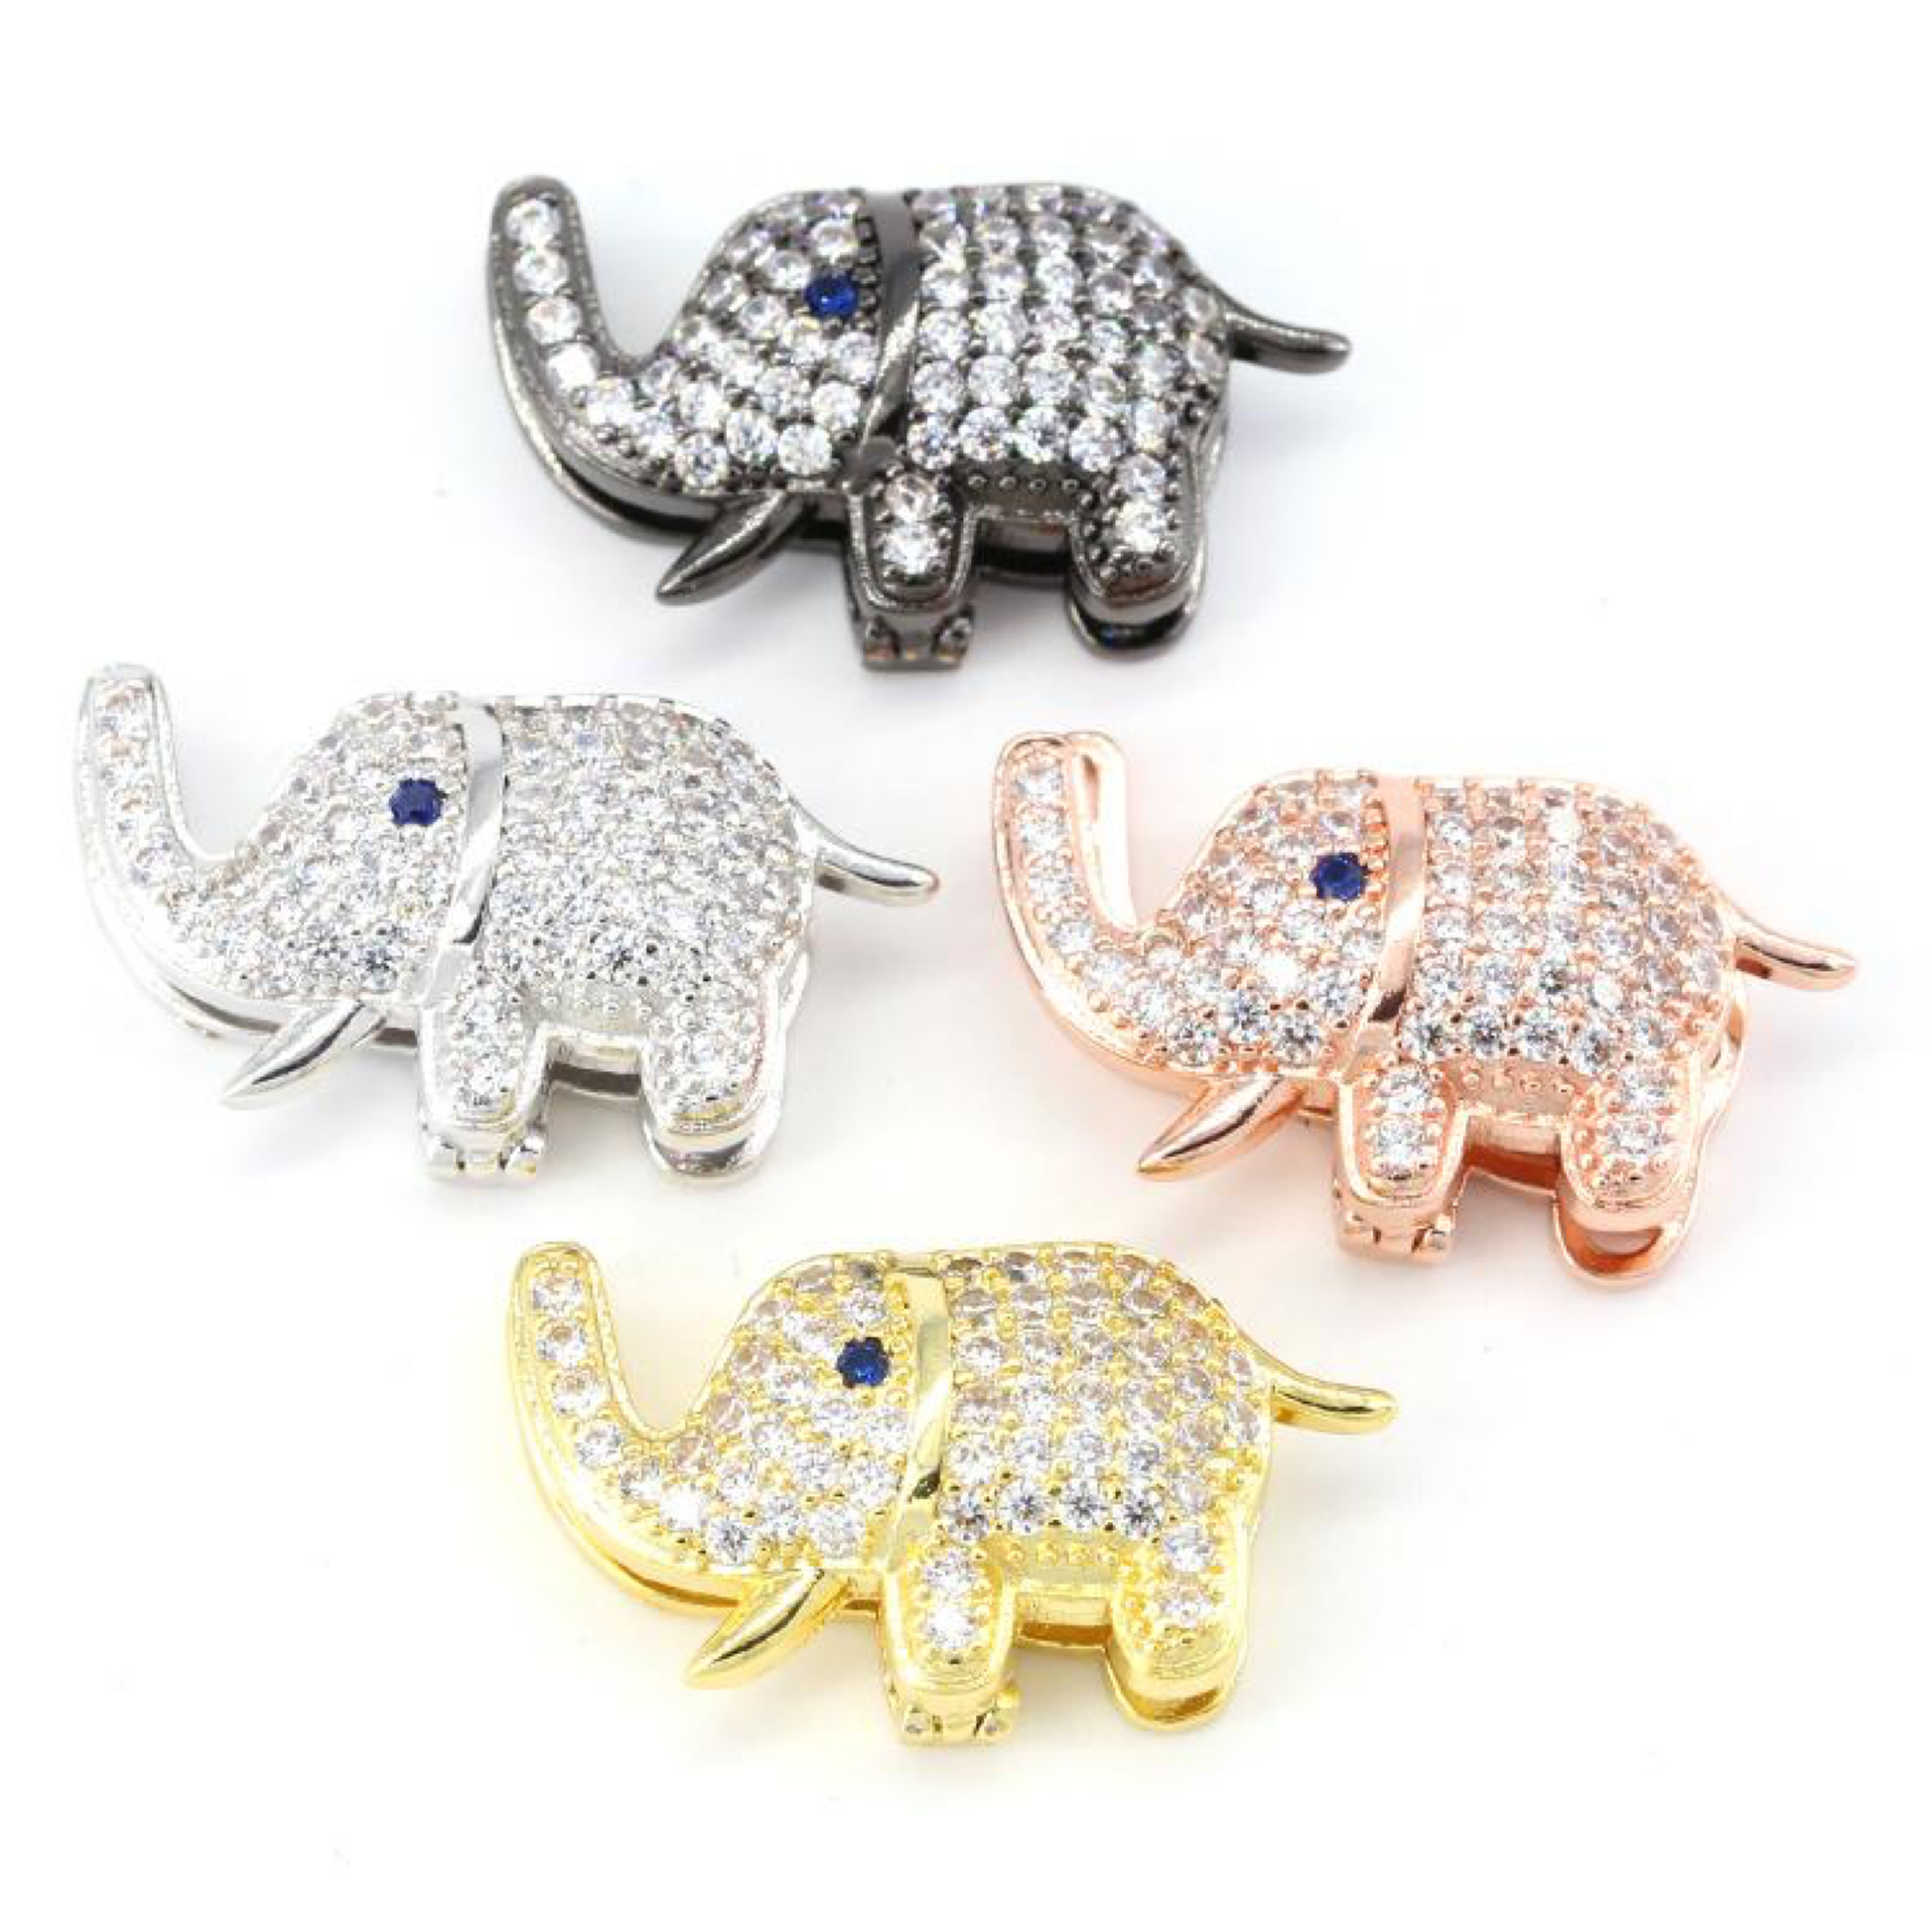 STUDDED ELEPHANT CHARMS LIFE COLLECTION - Unique Brazilian Jewelry (4503204986955)